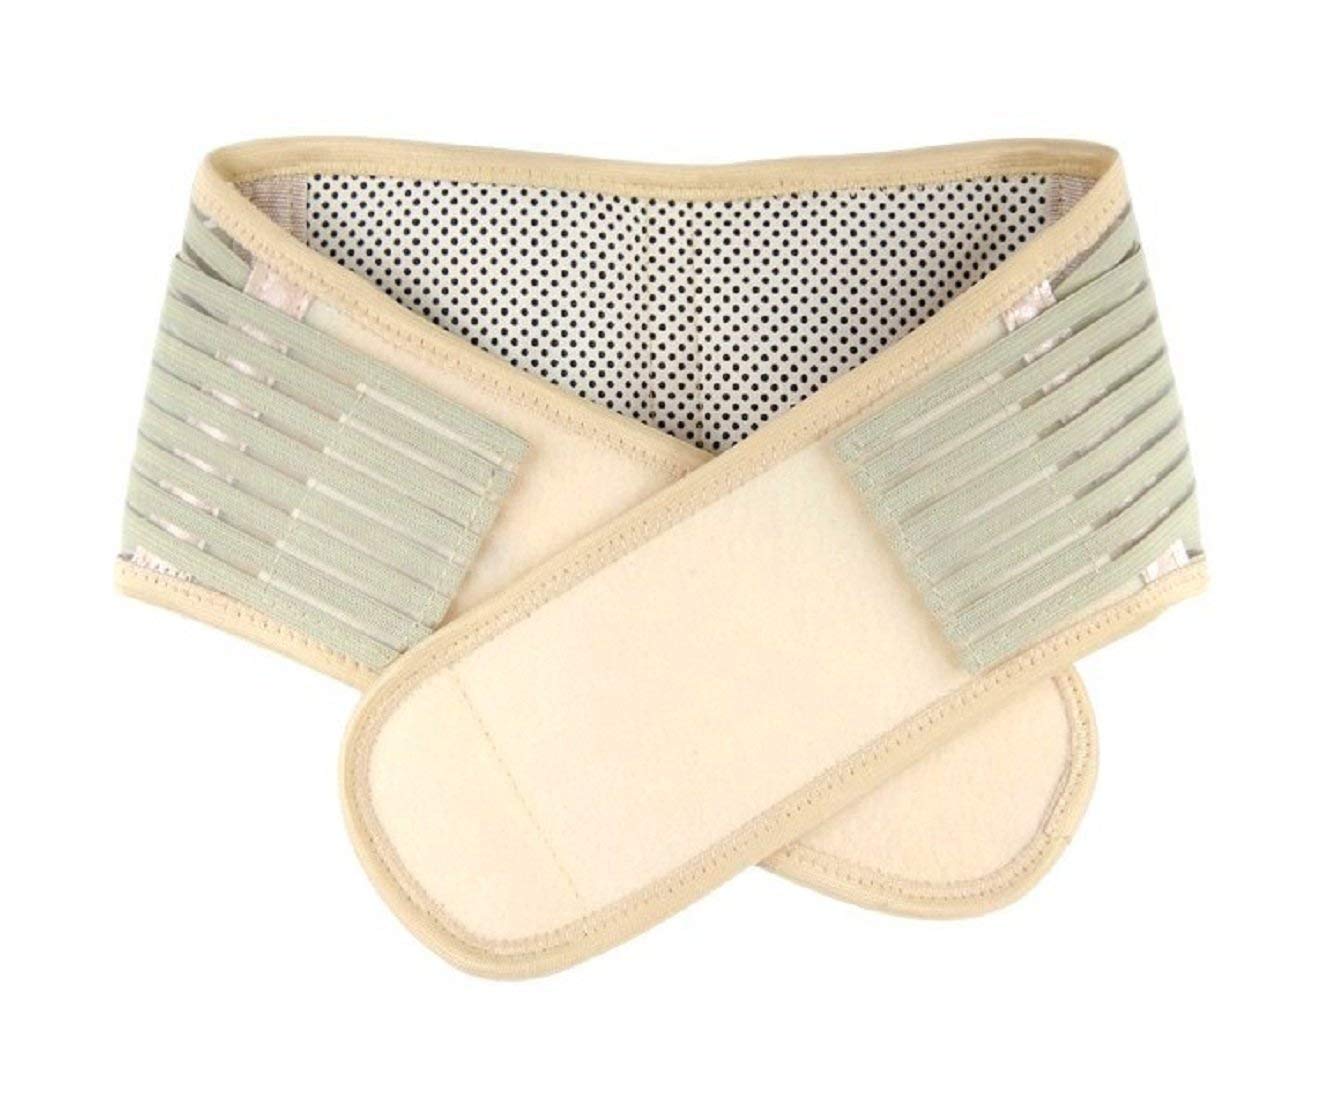 Importikaah’s-Self-Heating-Waist-Support-Belt-magnetic-therapy